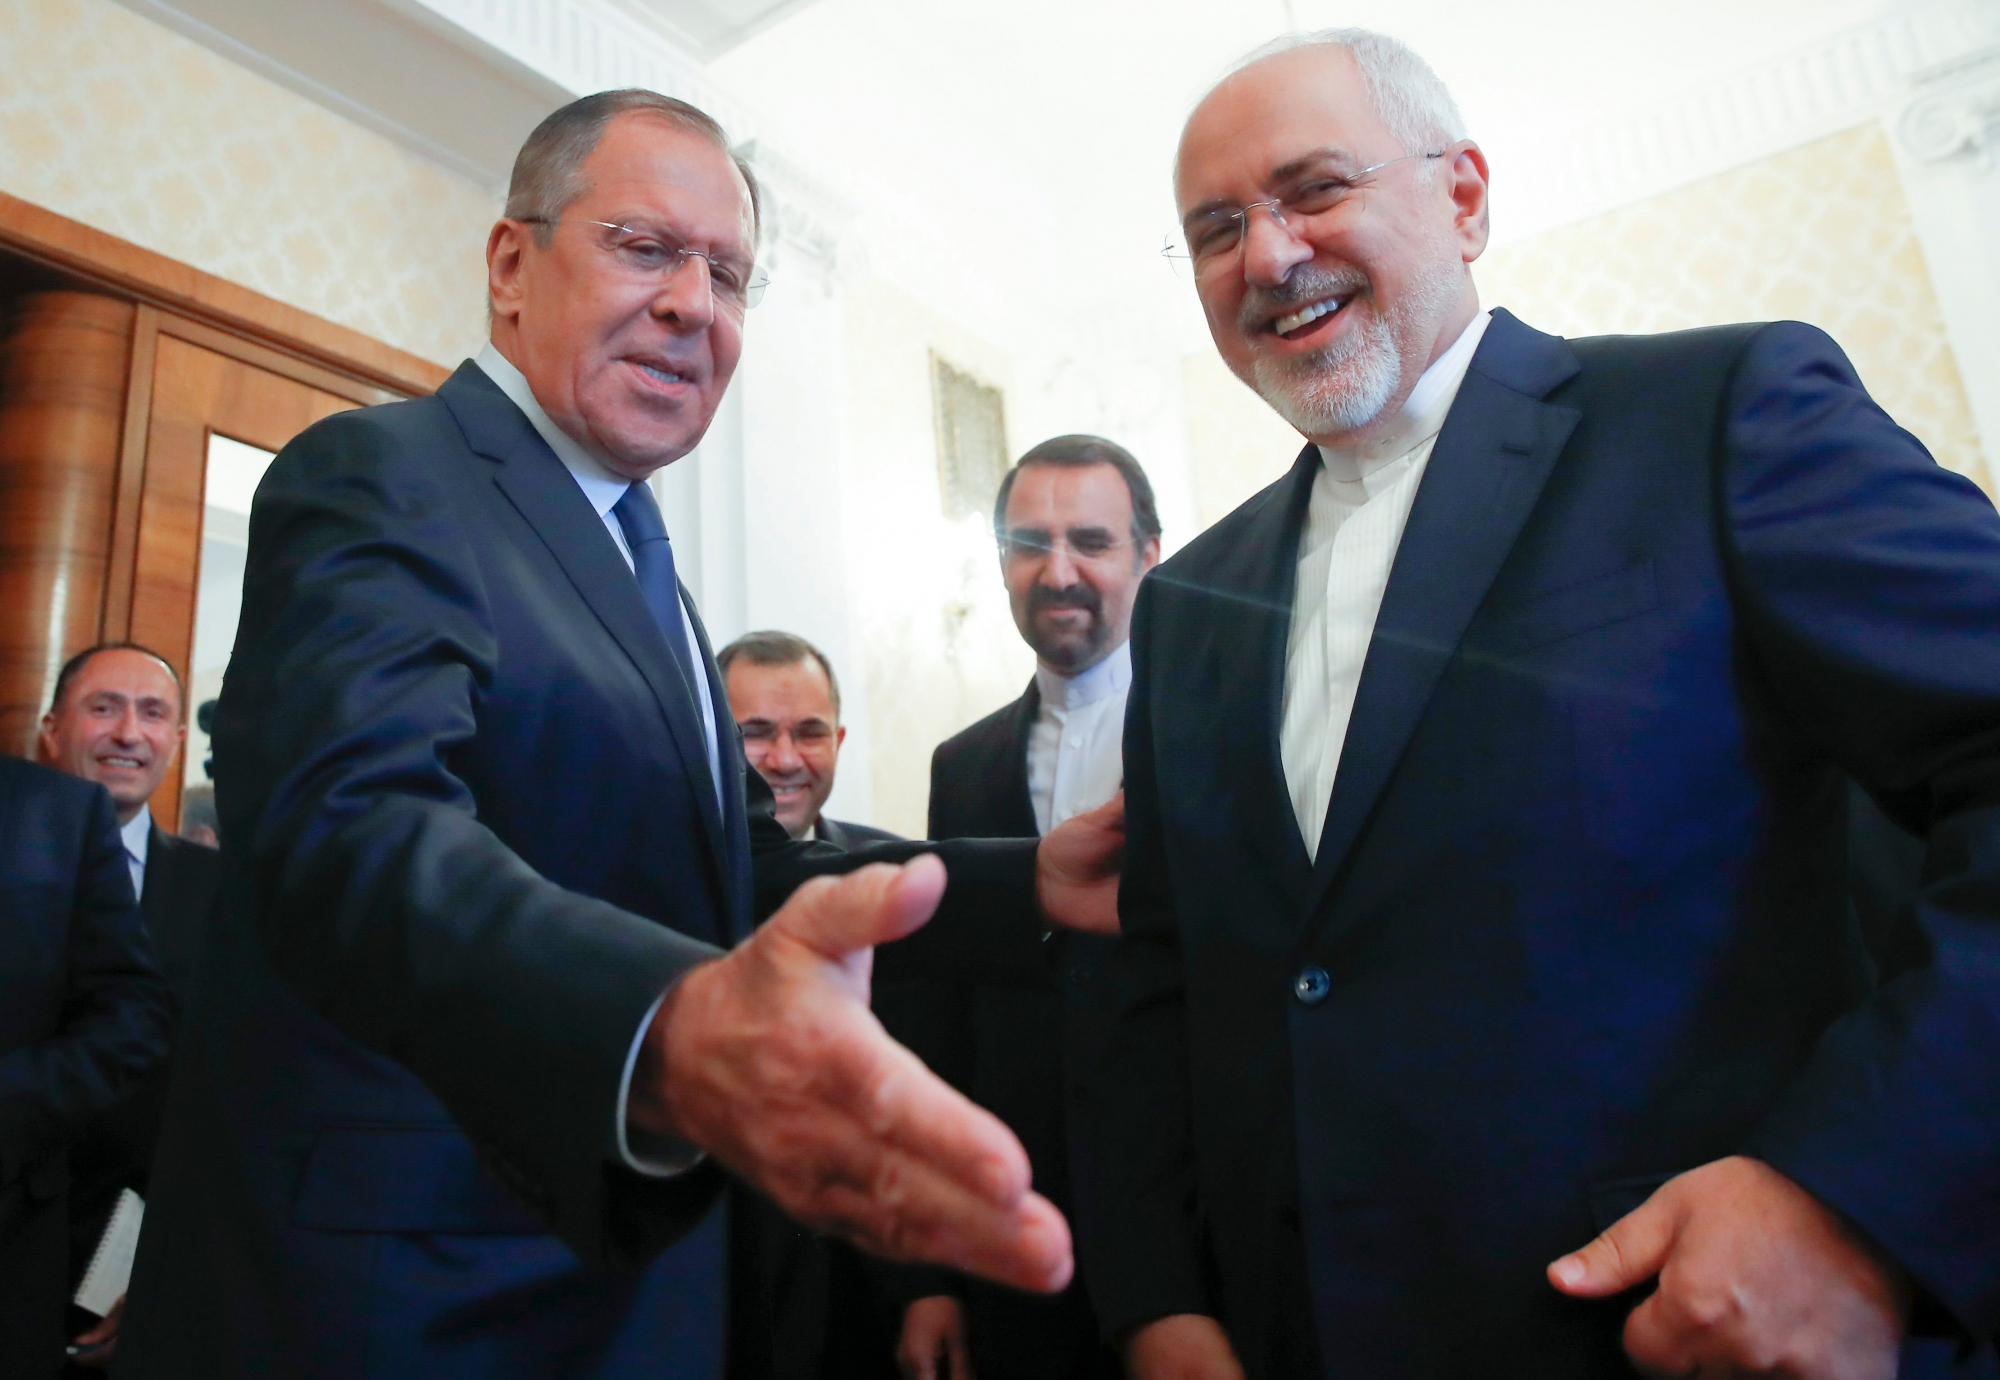 Russian Foreign Minister Sergey Lavrov, left, welcomes his Iranian counterpart Mohammad Javad Zarif ahead of their meeting in Moscow, Russia, Monday, May 14, 2018. Lavrov calls on participants in Iran nuclear deal to cooperate in defending legitimate interests. (Maxim Shemetov/Pool Photo via AP) Russia Iran